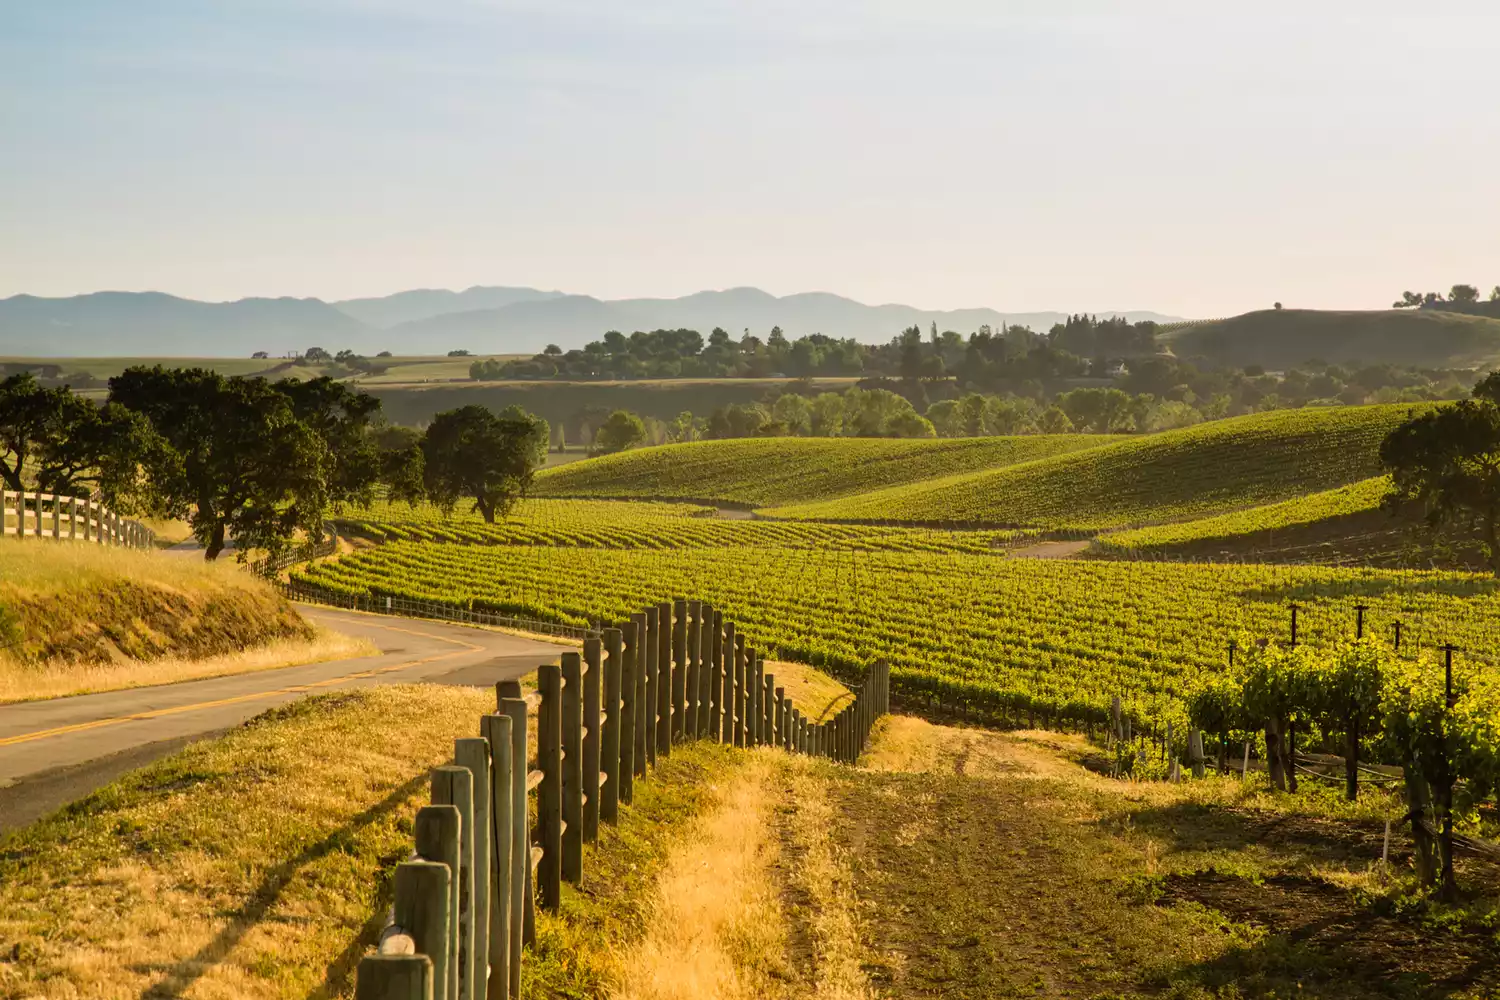 Stunning Hikes, World-Class Wine, Glamping, and Horseback Riding Can Be Found in This California Region That Must Be Visited